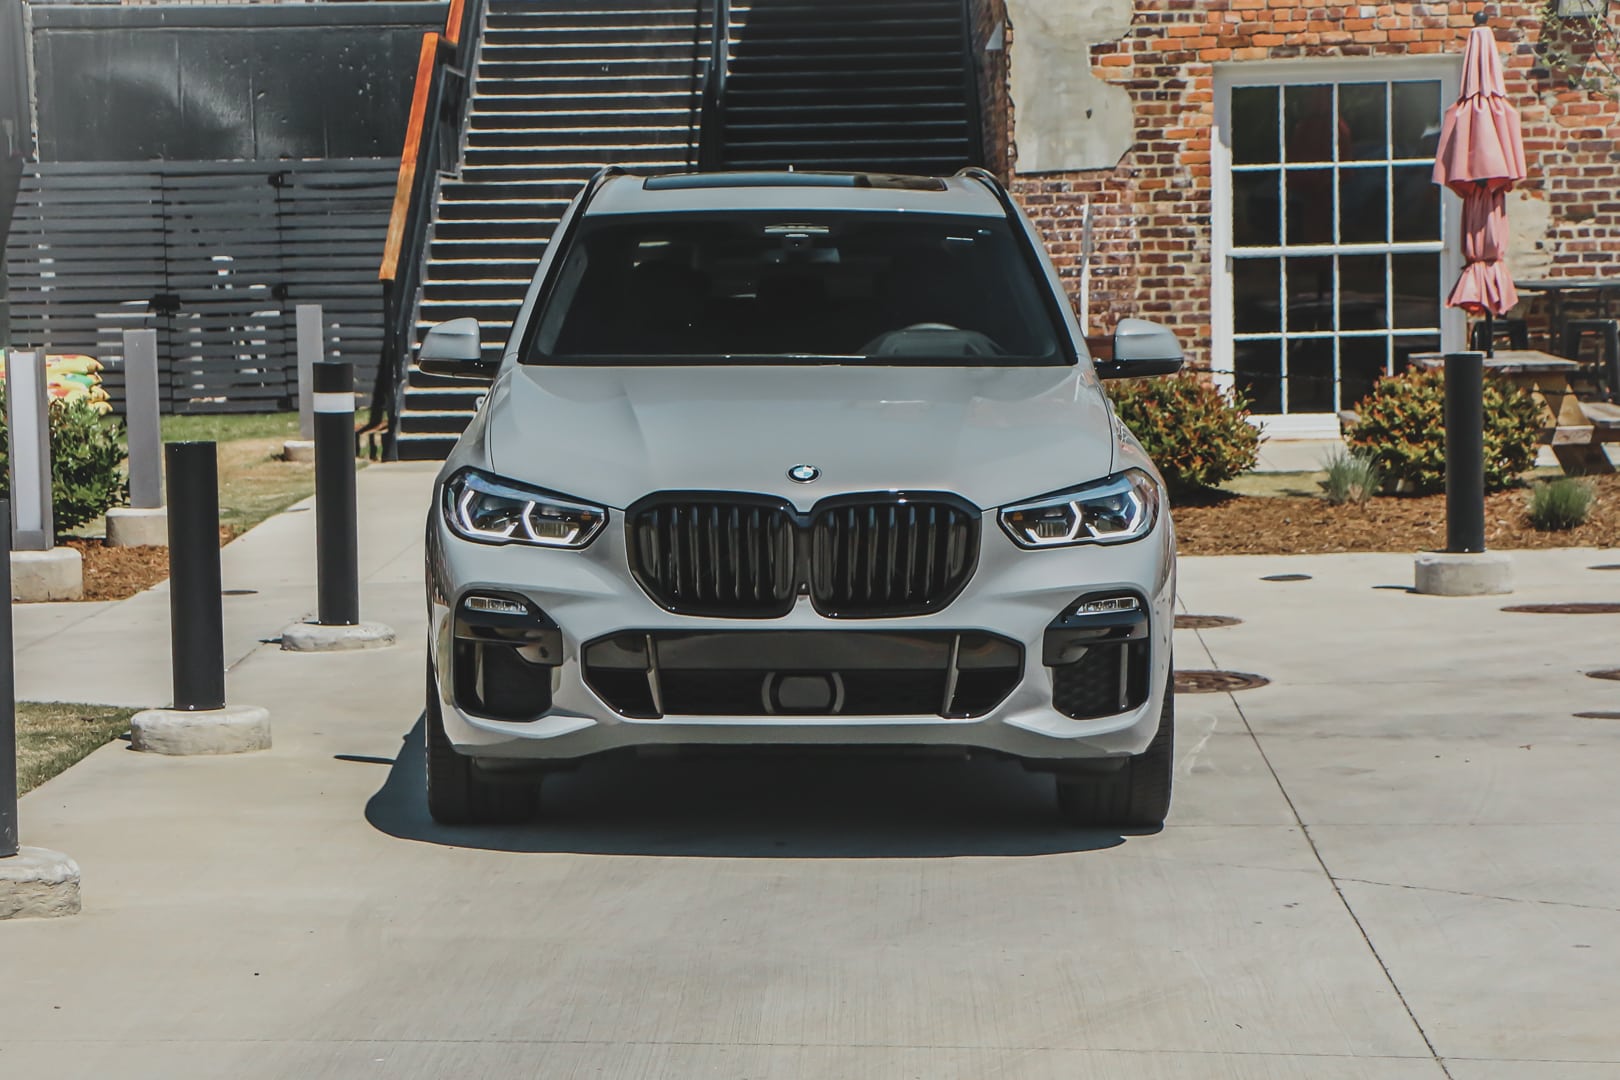 BMW X5 M50i in Lime Rock Grey a Monster Family SUV BMW SG